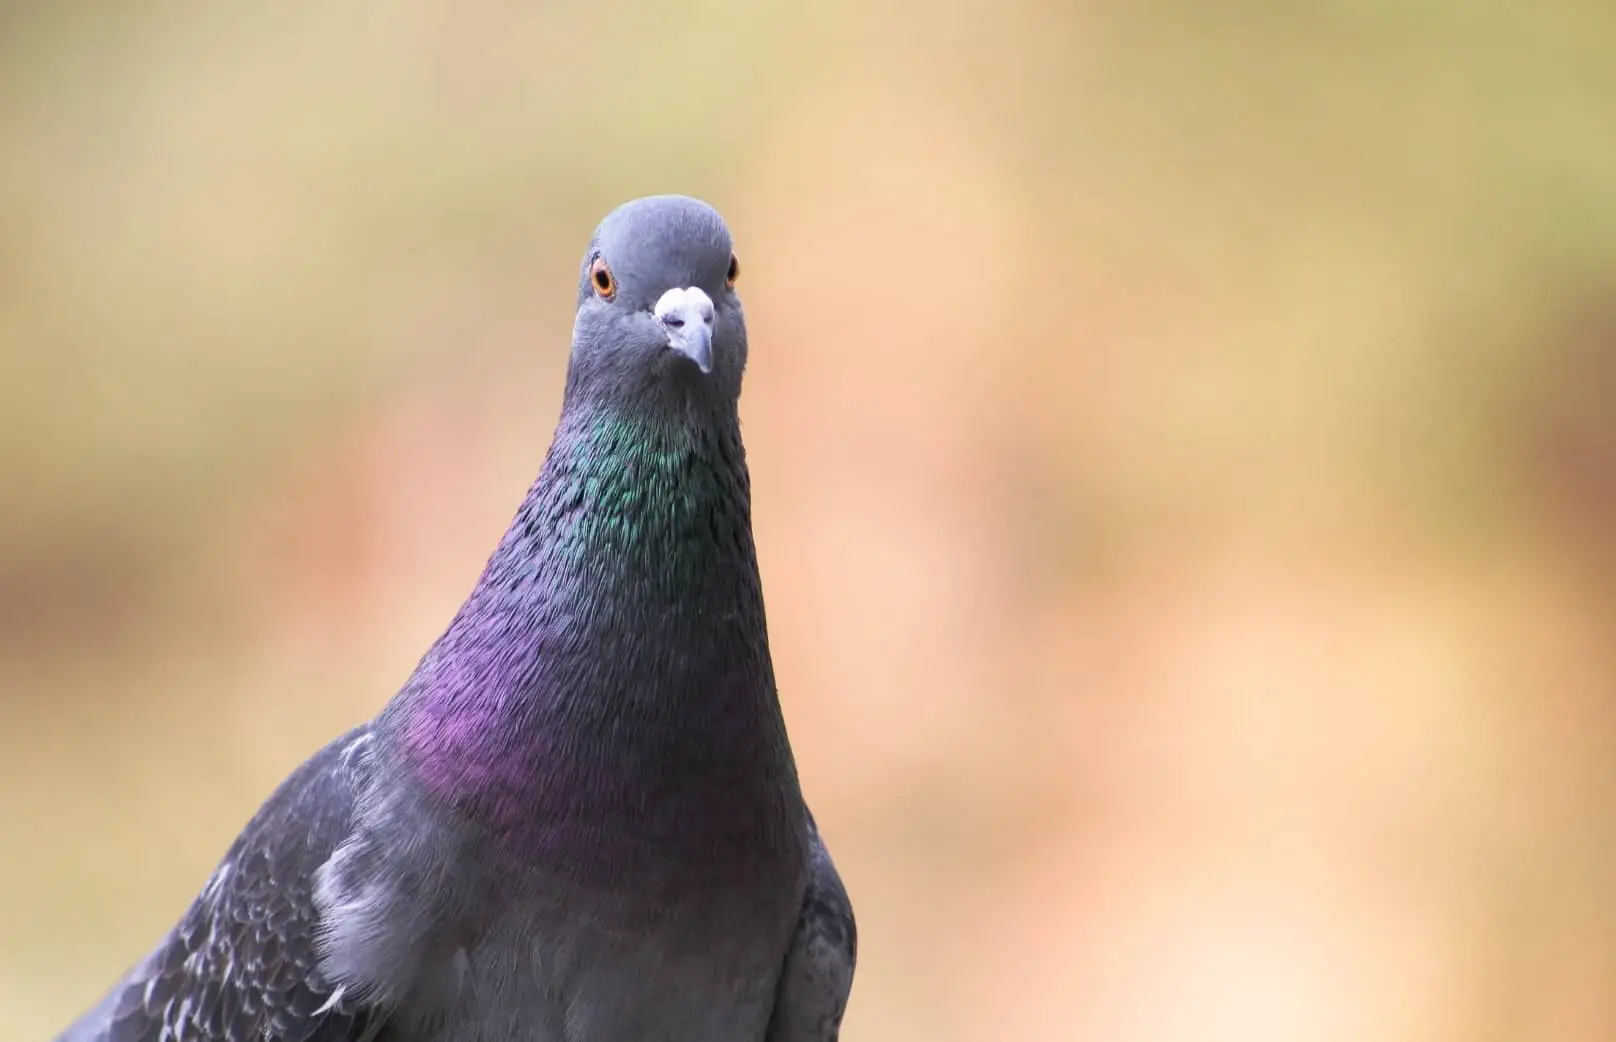 Looking for Love! Why Do Pigeons Coo, Grunt & Whistle? + (Video)